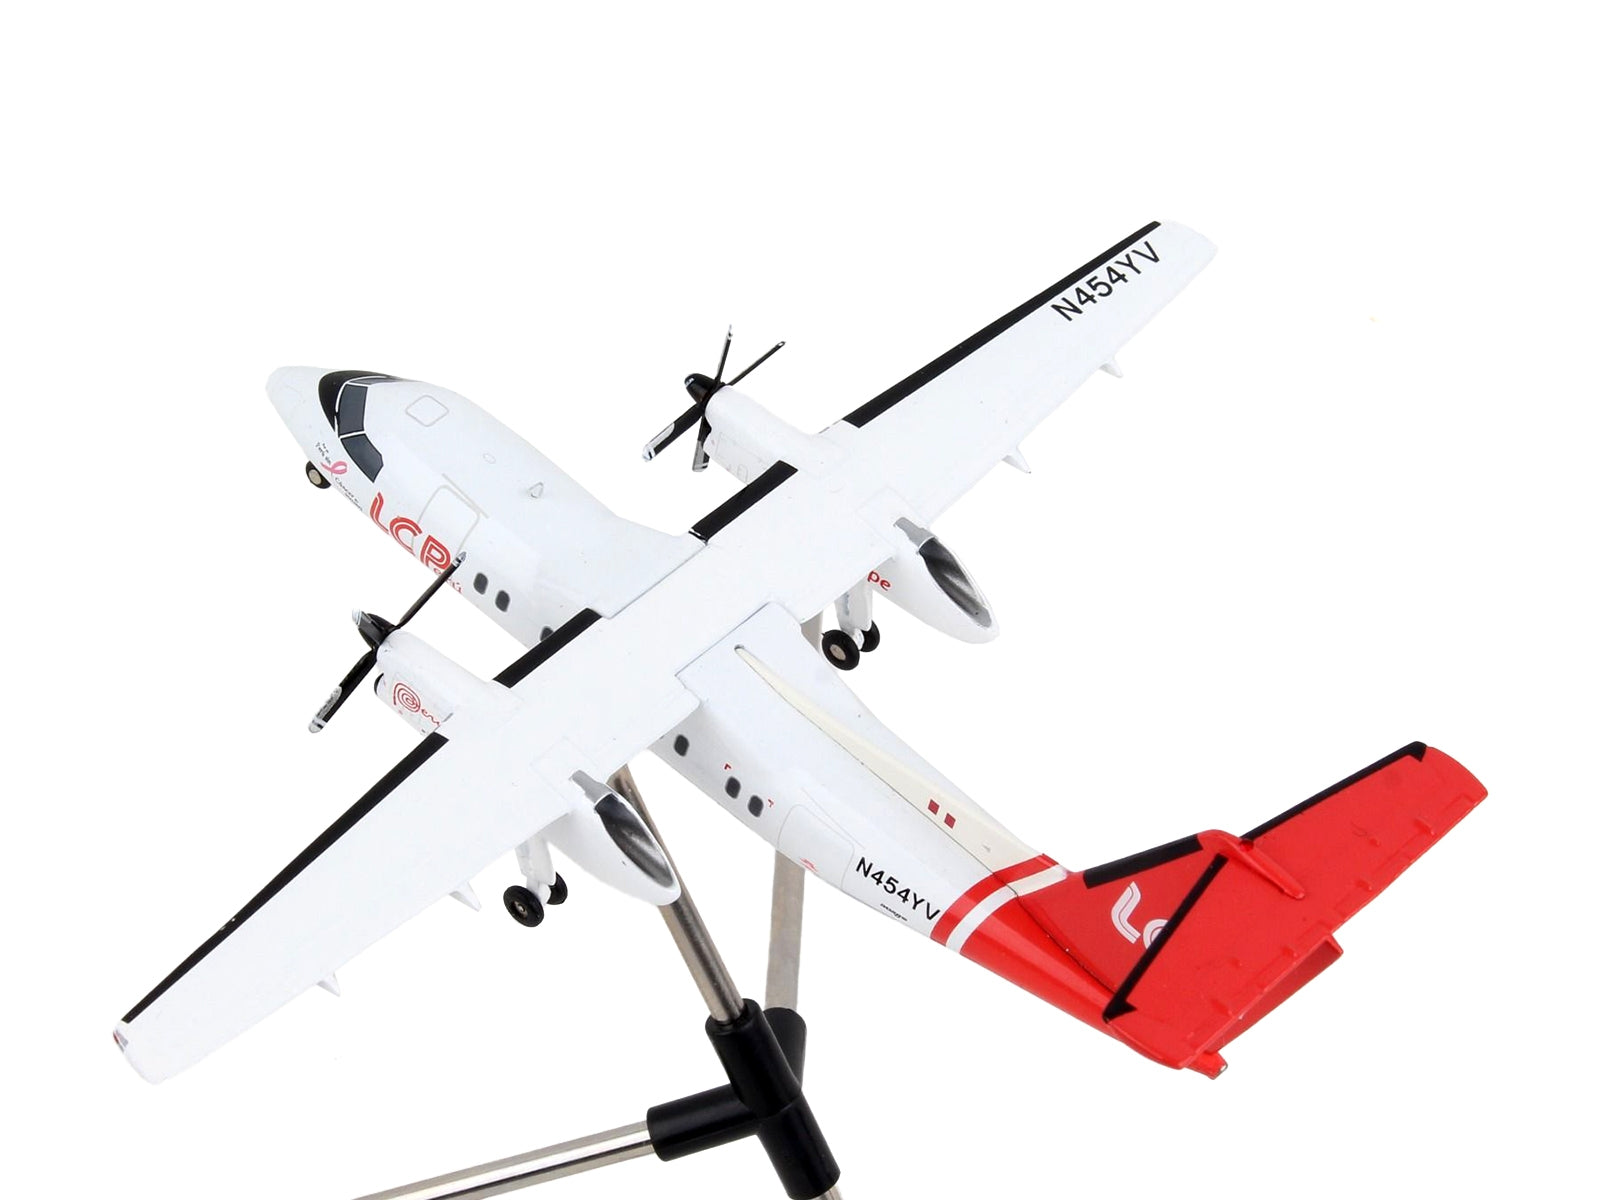 Bombardier Dash 8-200 Commercial Aircraft "LC Peru" White with Red Tail "Gemini 200" Series 1/200 Diecast Model Airplane by GeminiJets